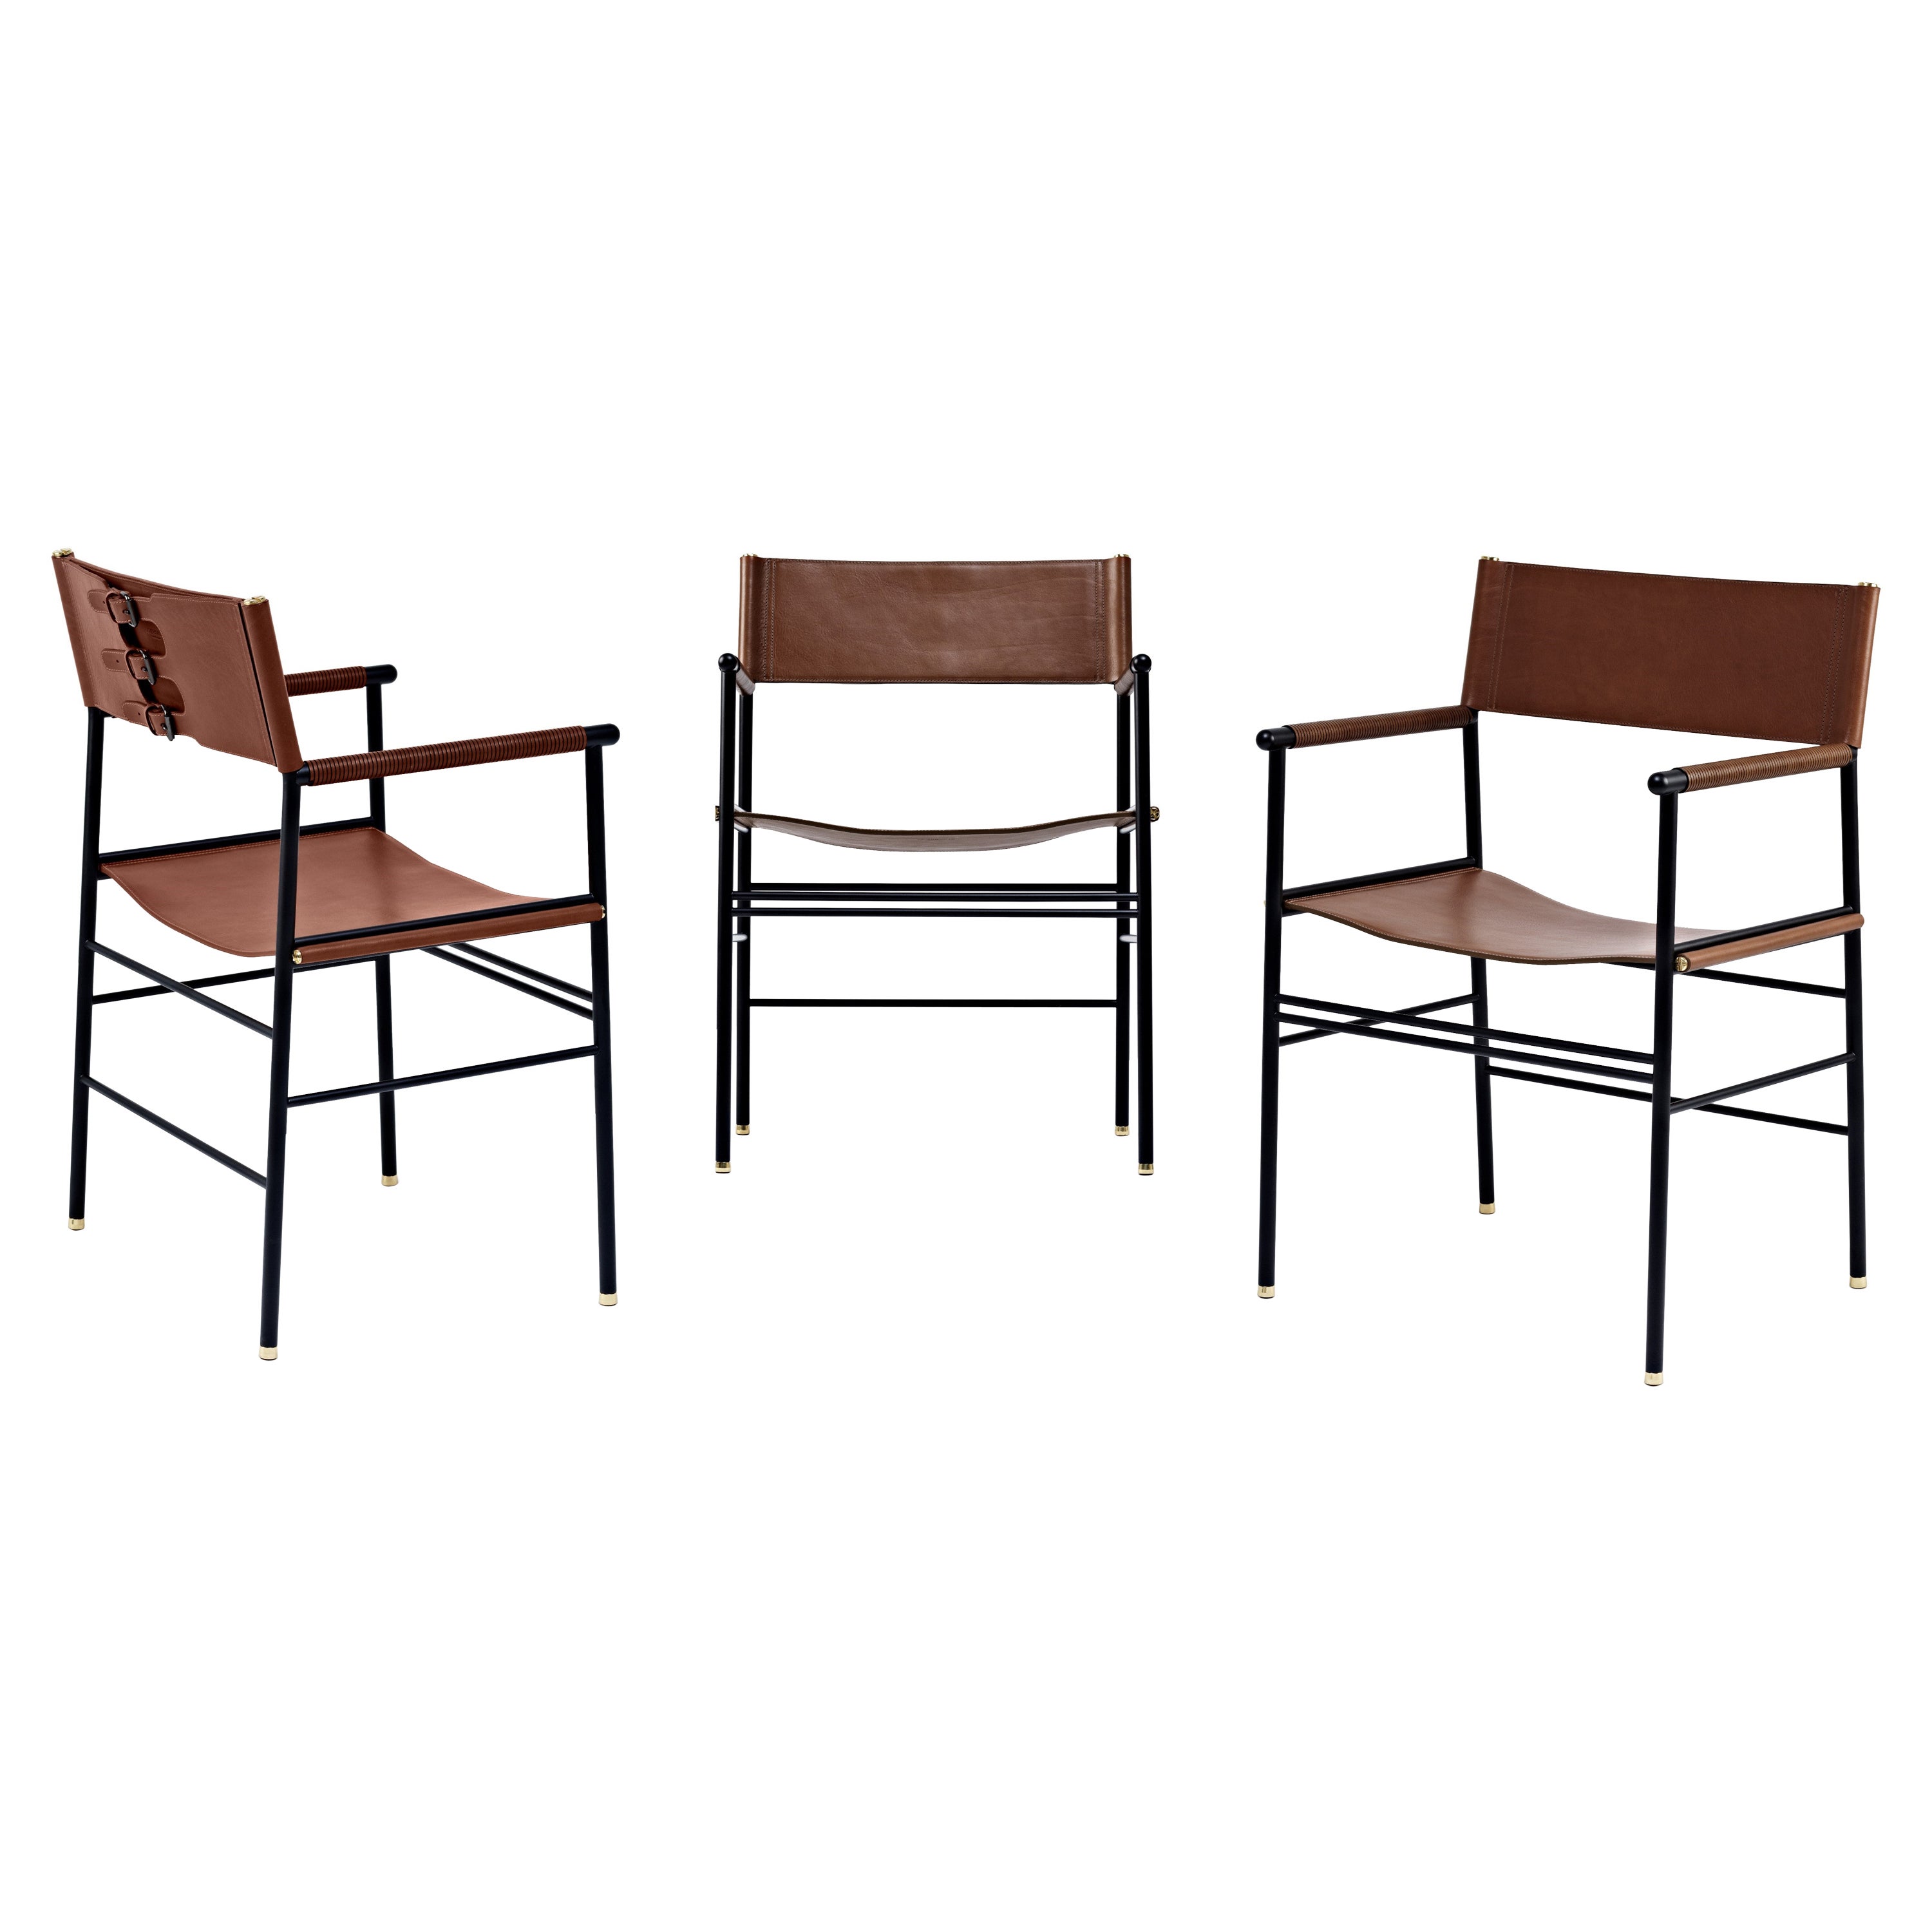 Set of 3 Contemporary Armchair Dark Brown Leather & Black Rubber Metal